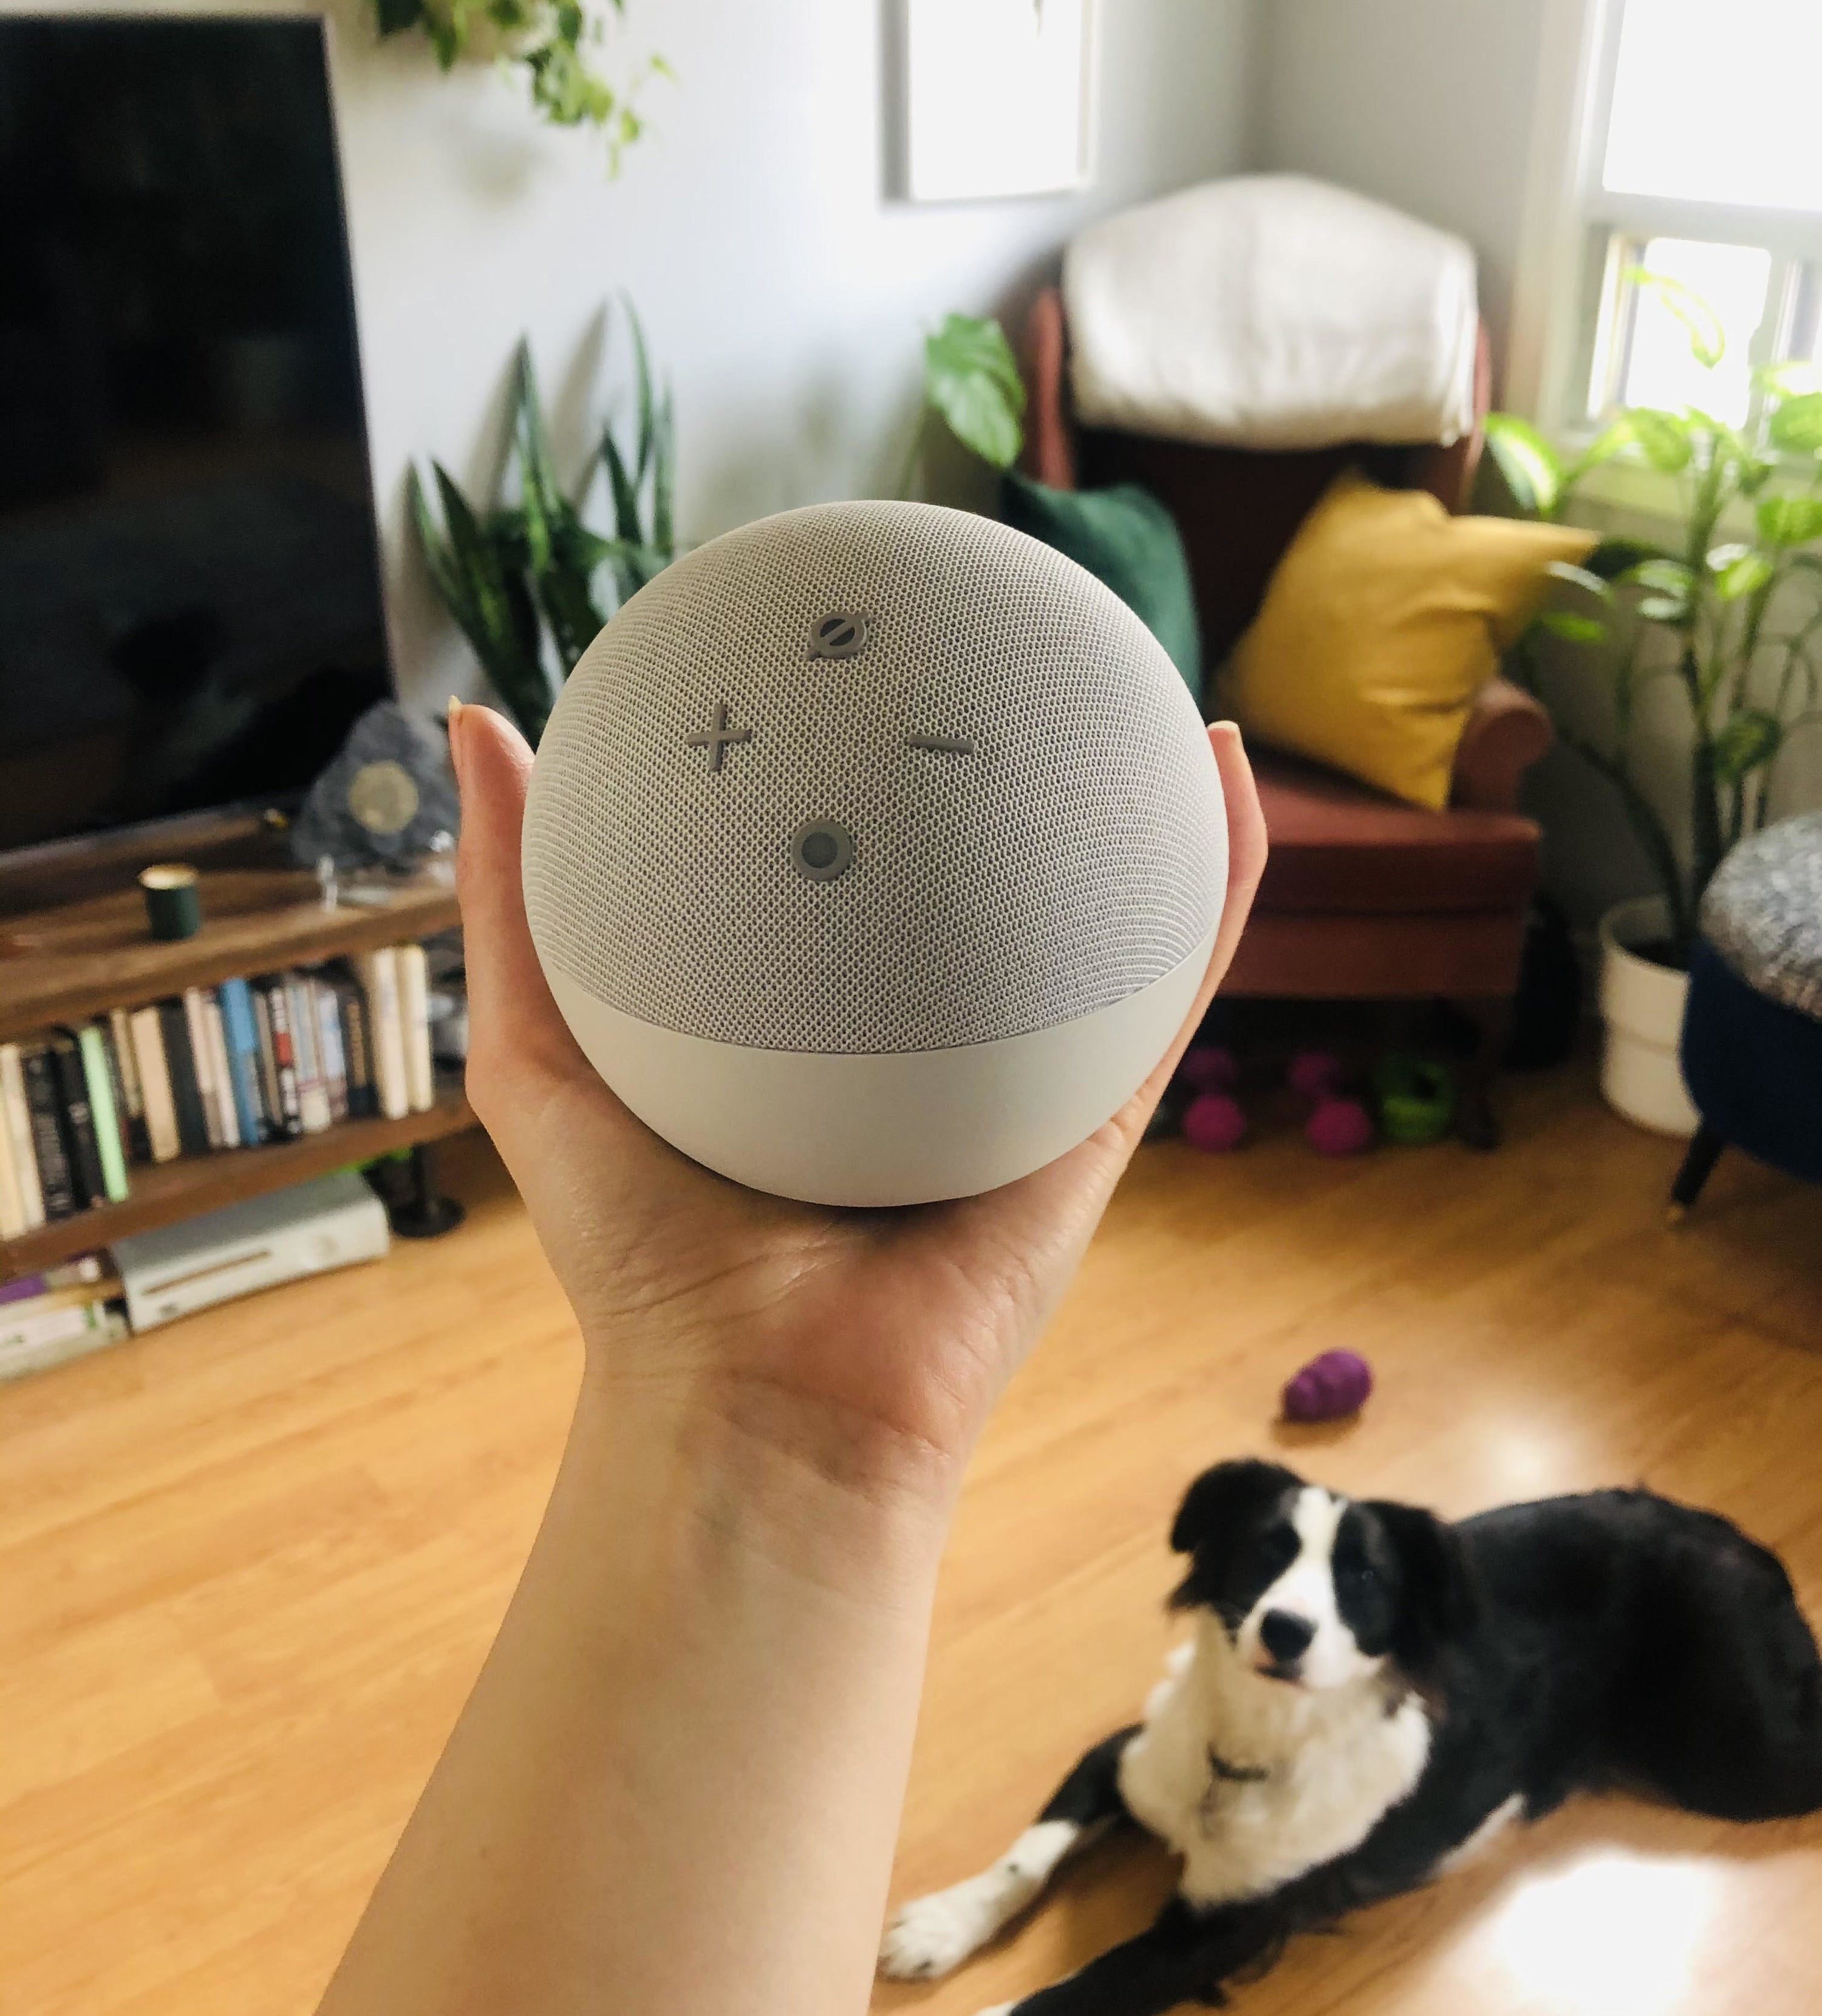 A person holding an echo dot